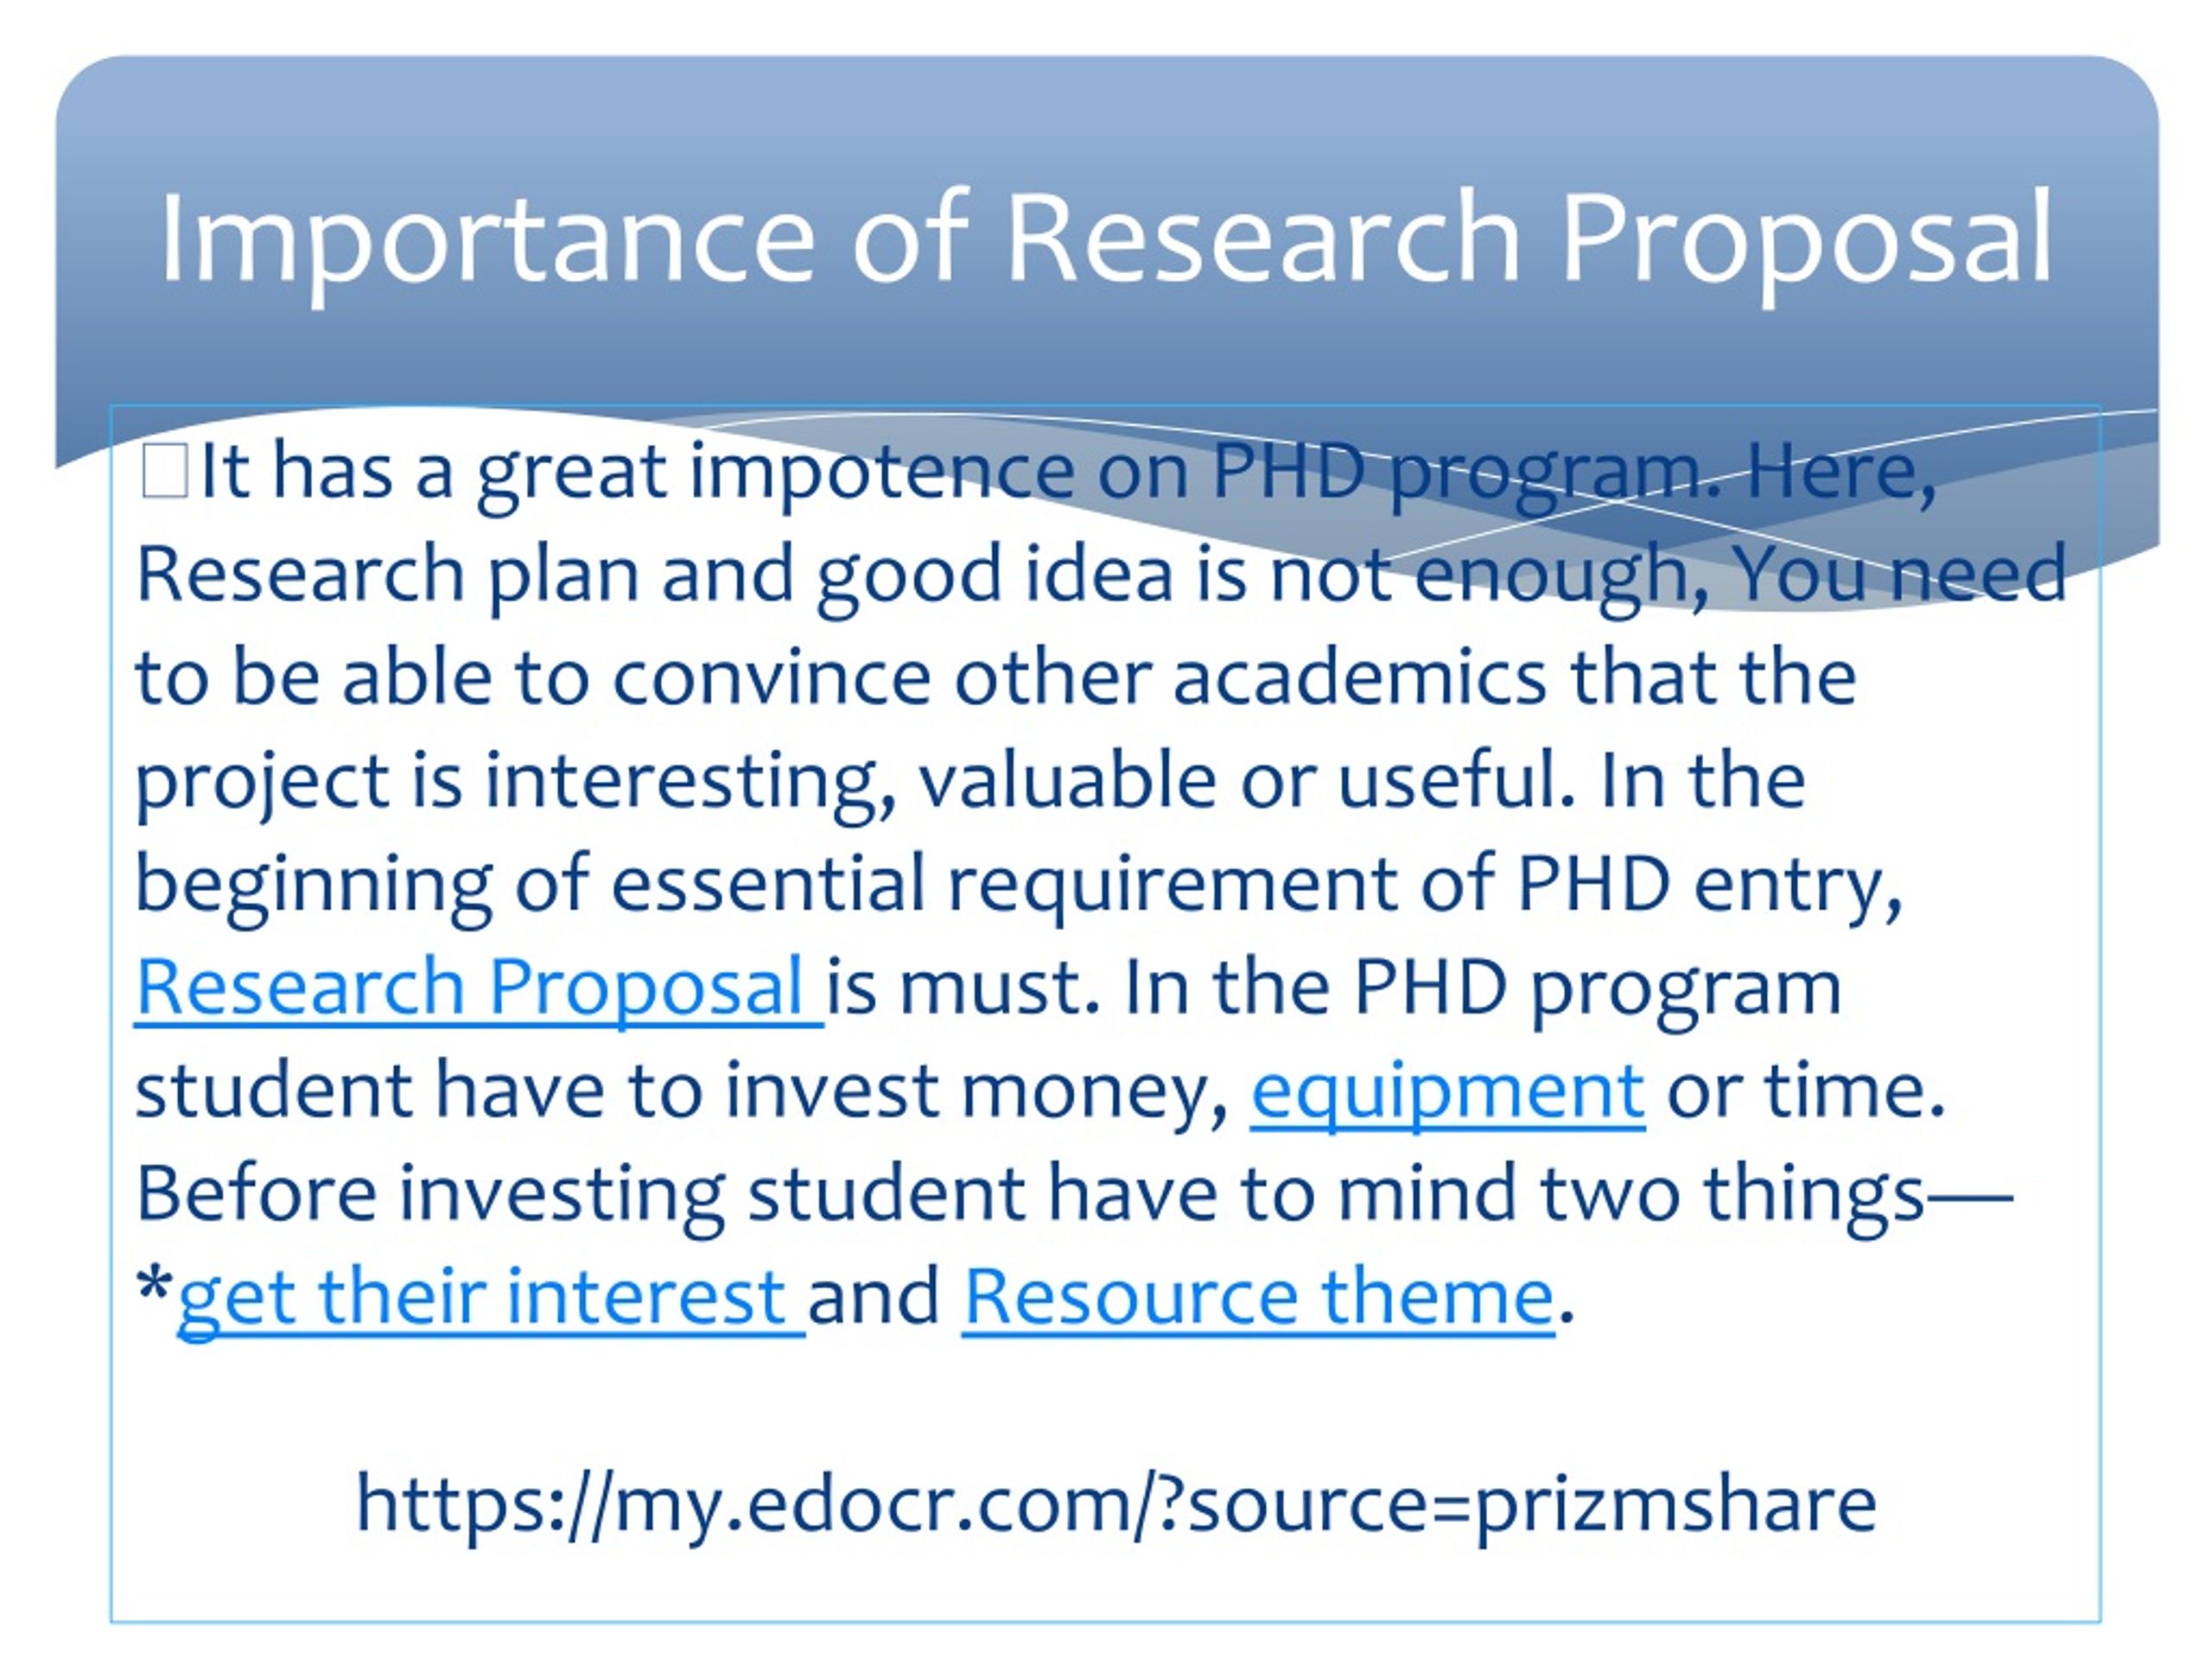 research proposal importance